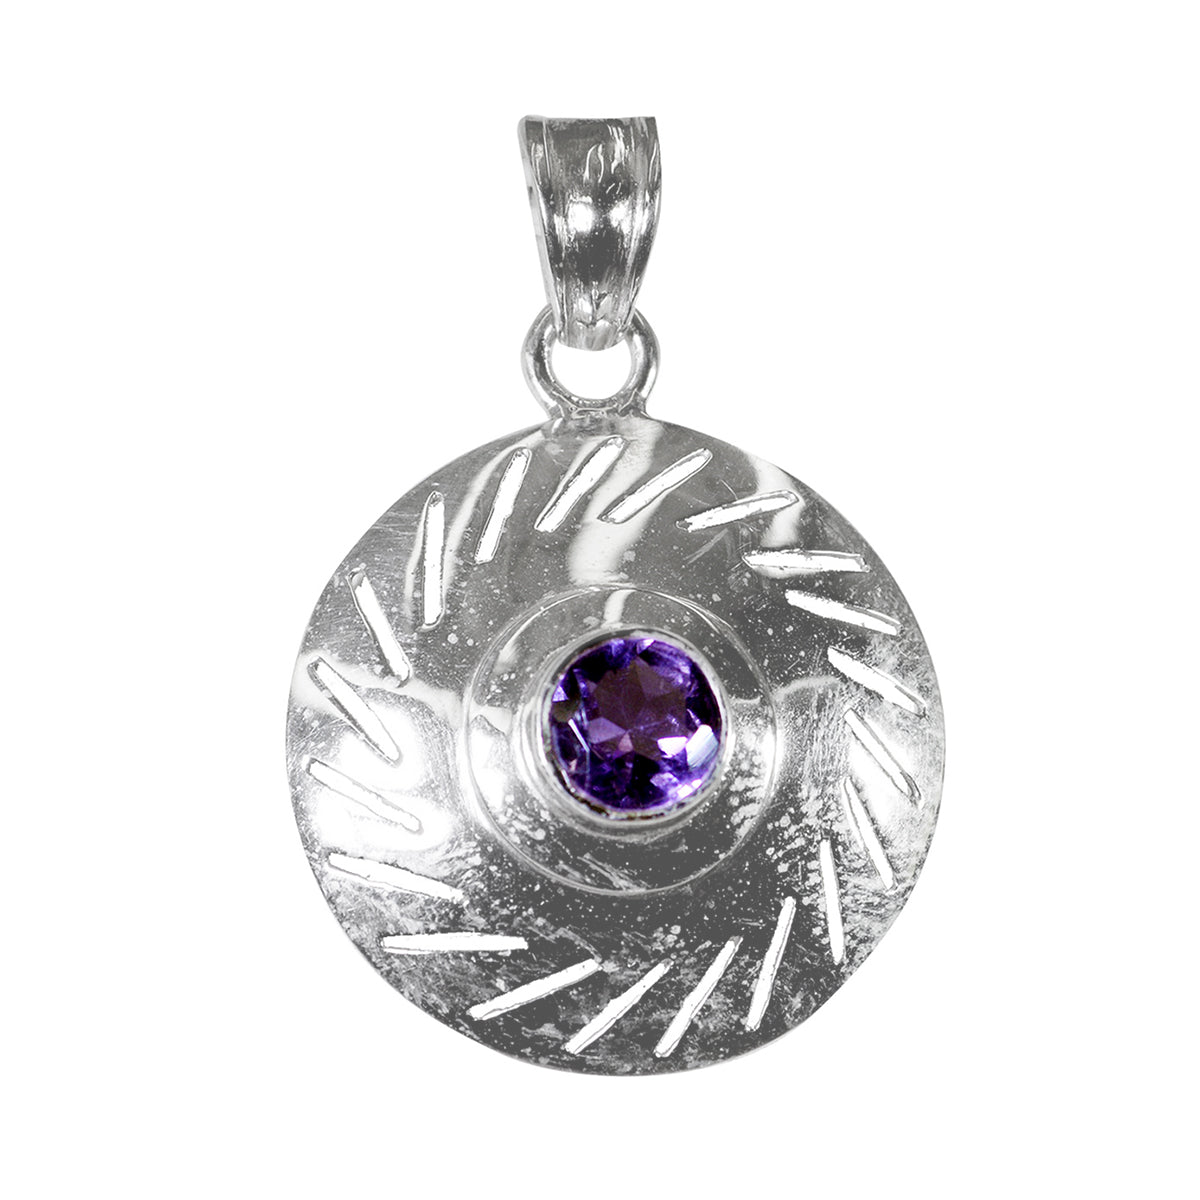 Riyo Delightful Gems Round Faceted Purple Amethyst Silver Pendant Gift For Wife